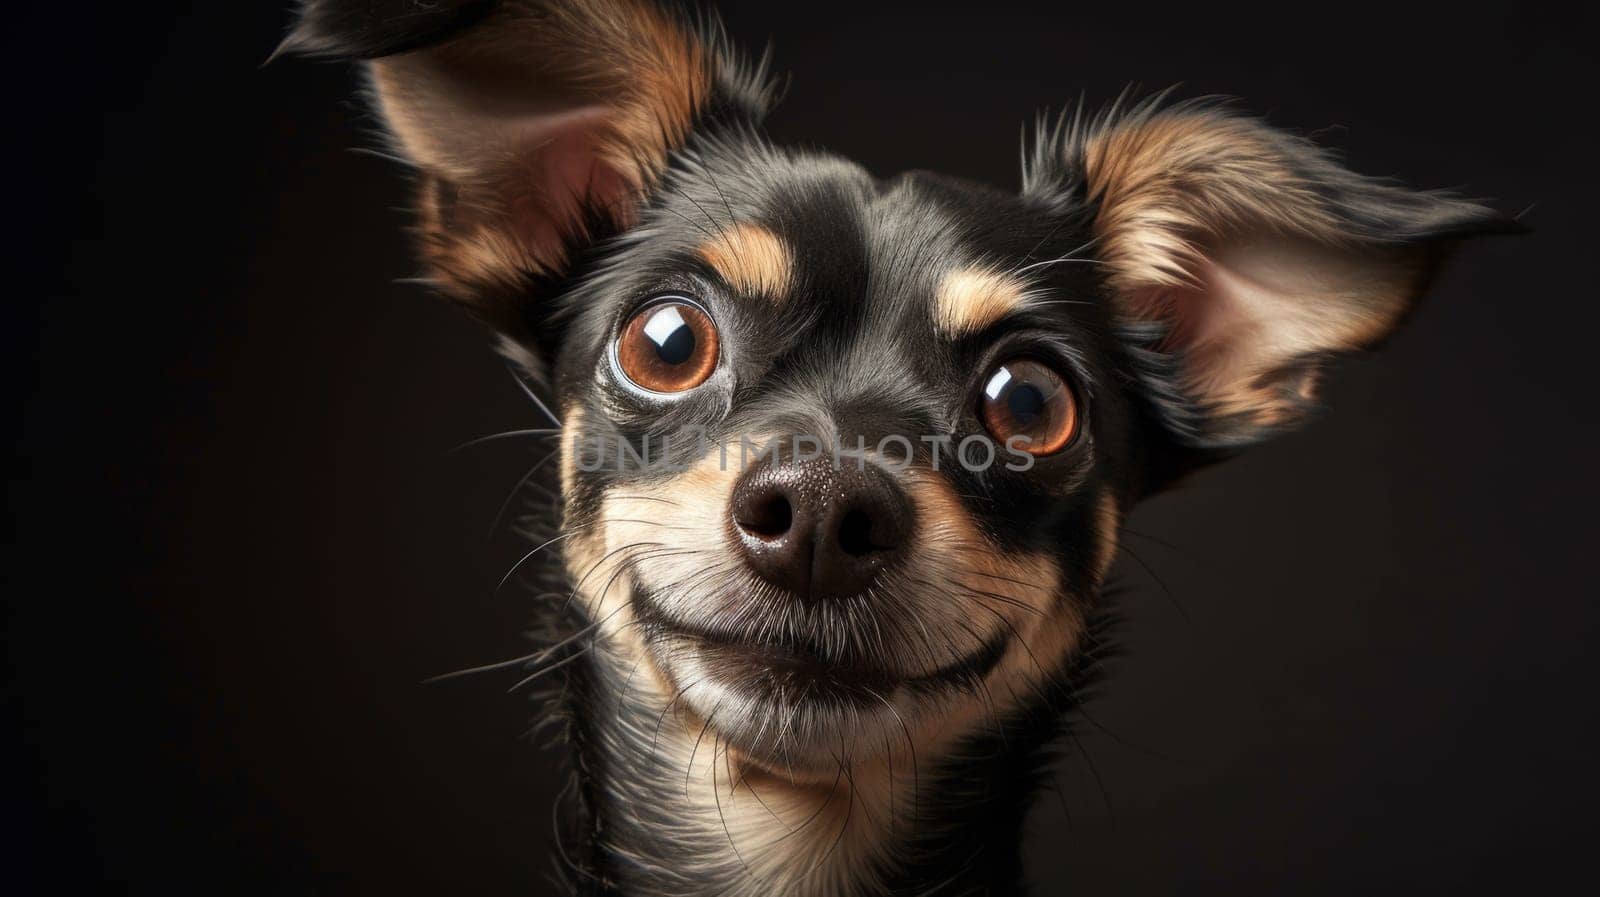 A close up of a dog with big brown eyes and ears